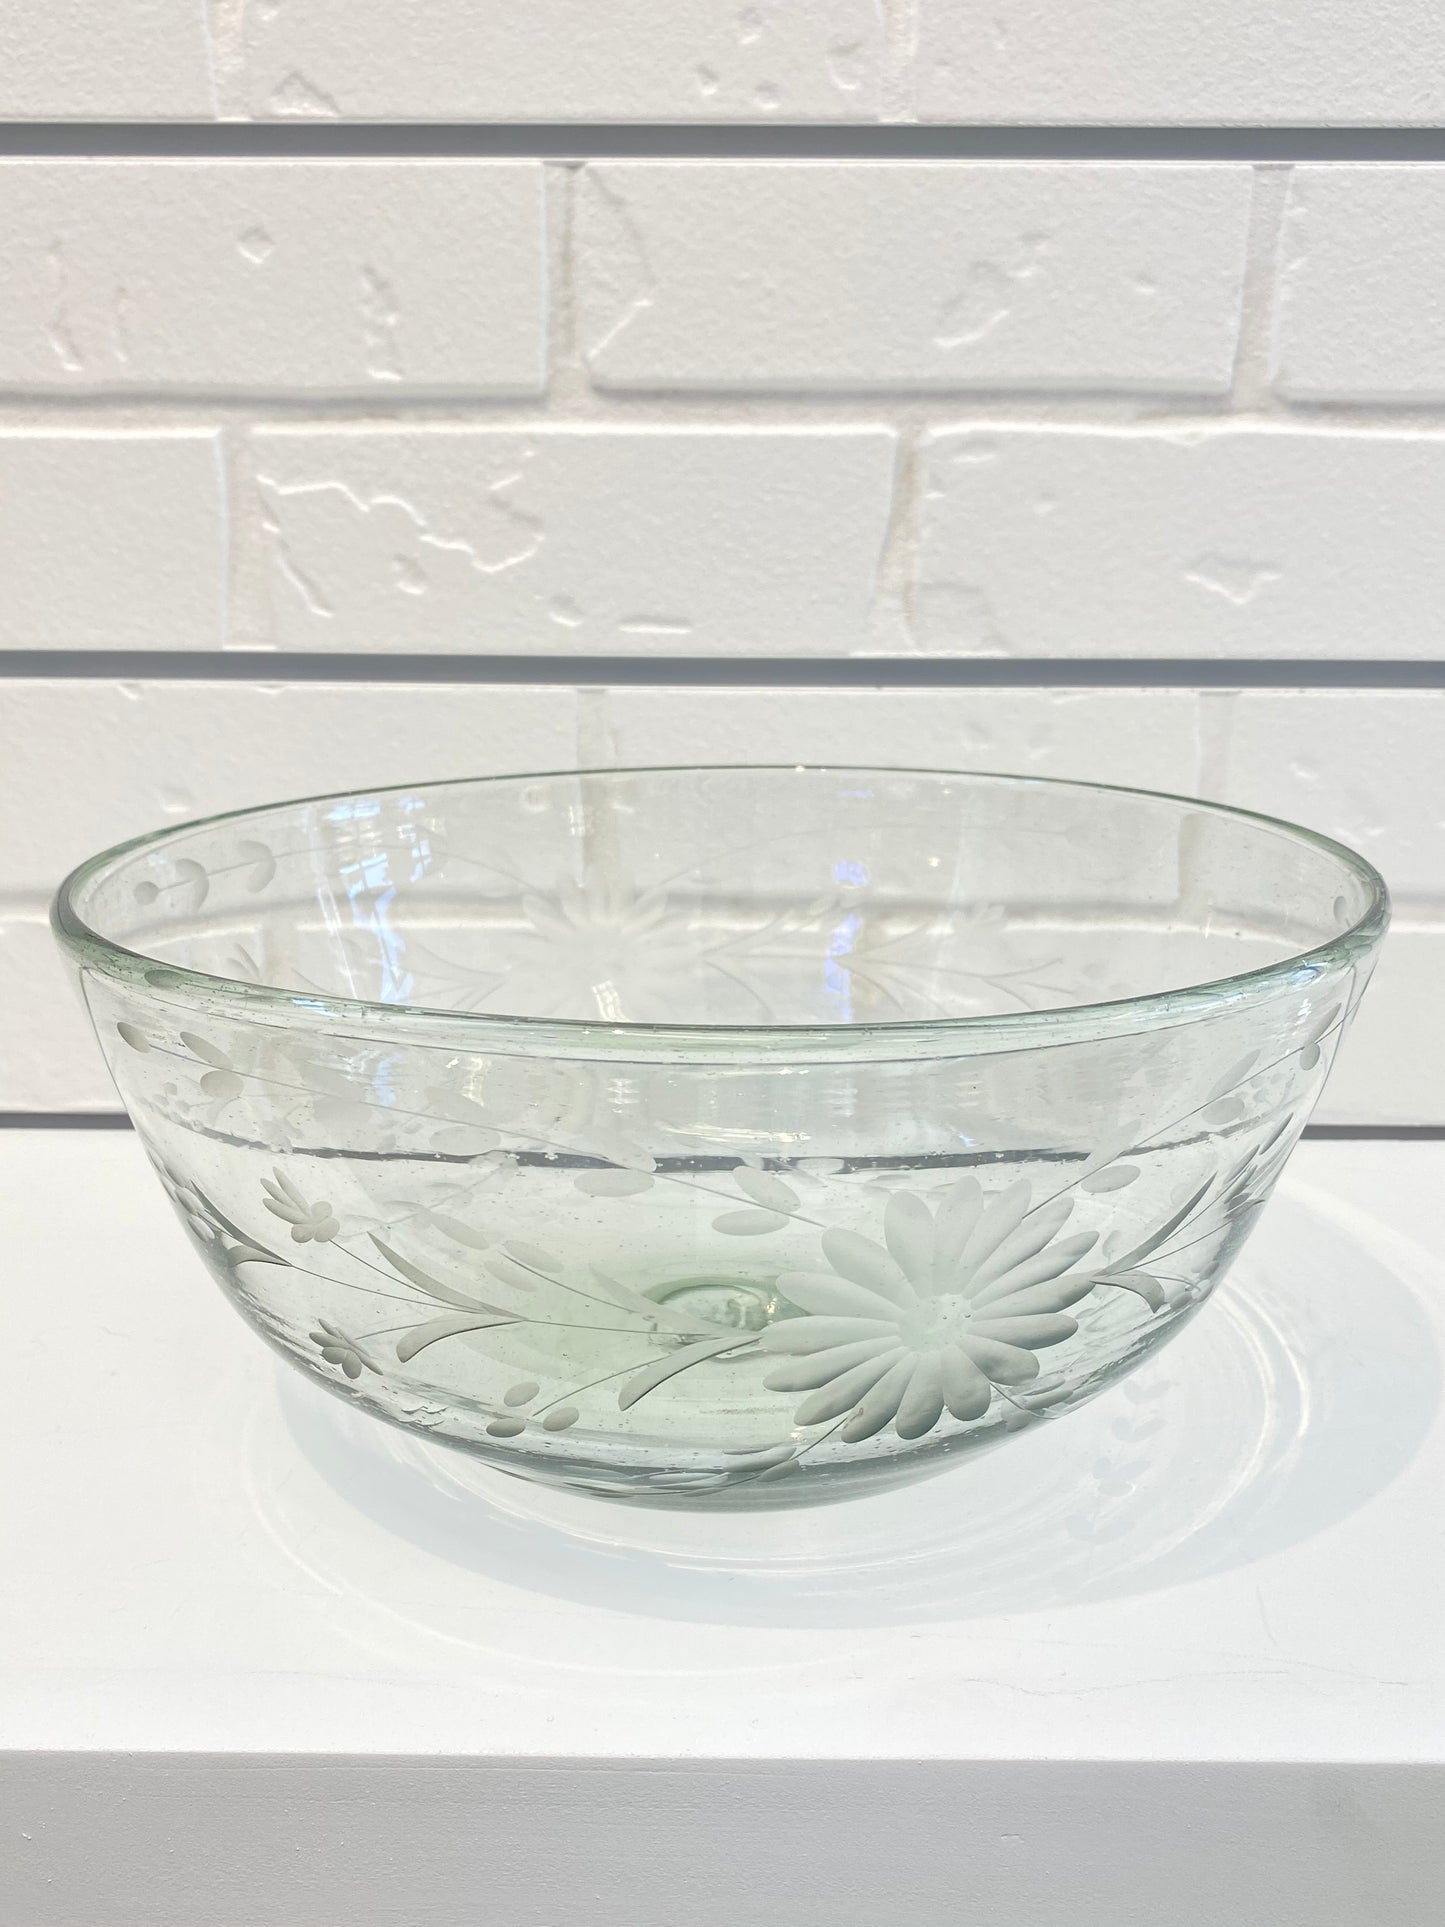 Mexico Condessa Glass Serving Bowl - Clear Bowls Rose Ann Hall Designs   